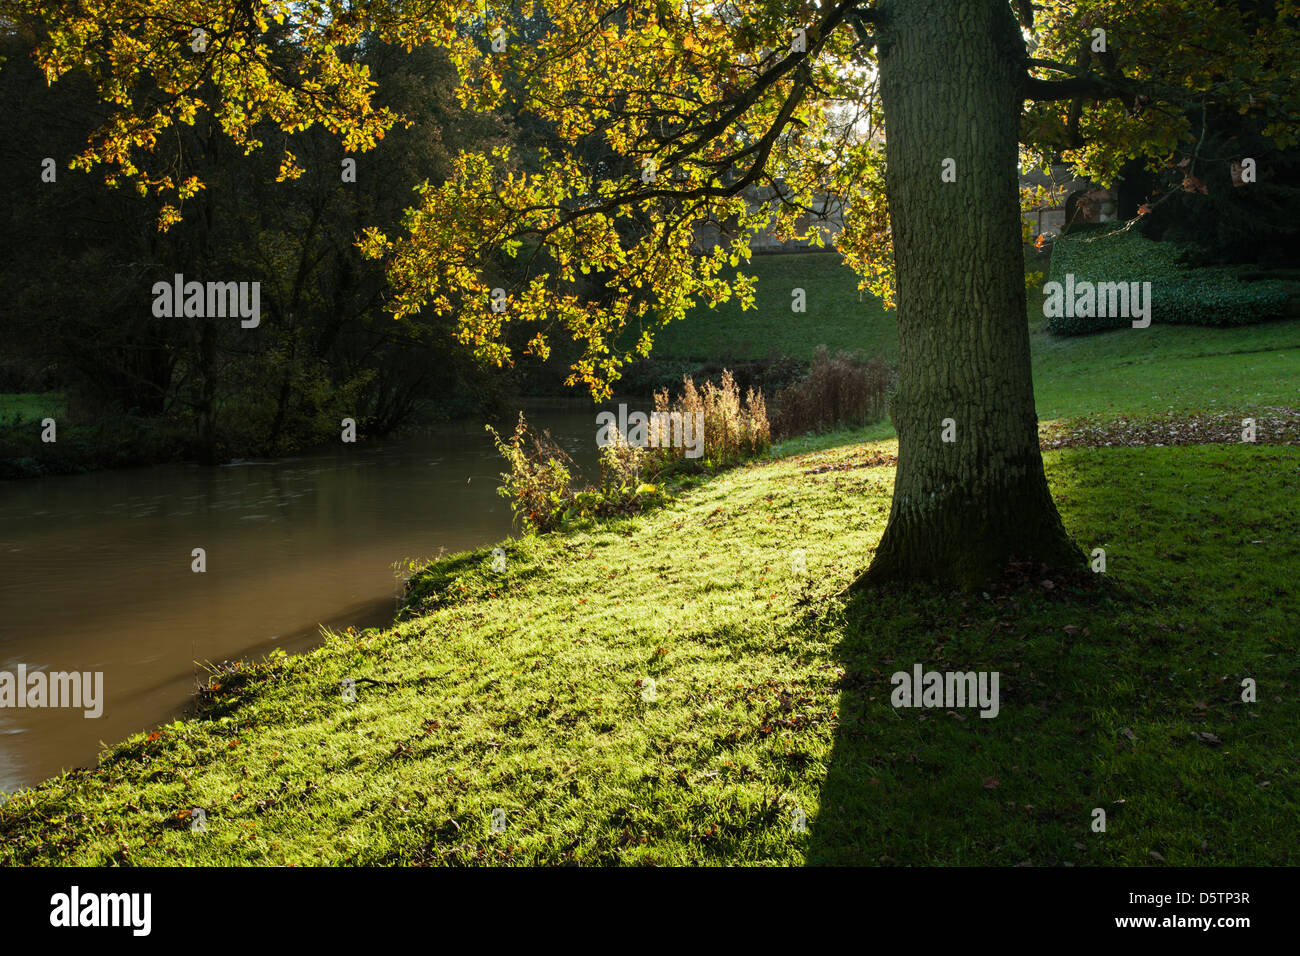 The backlit autumnal leaves and mature Oak tree, beside the River Cherwell in the grounds of Rousham House, Oxfordshire, England Stock Photo